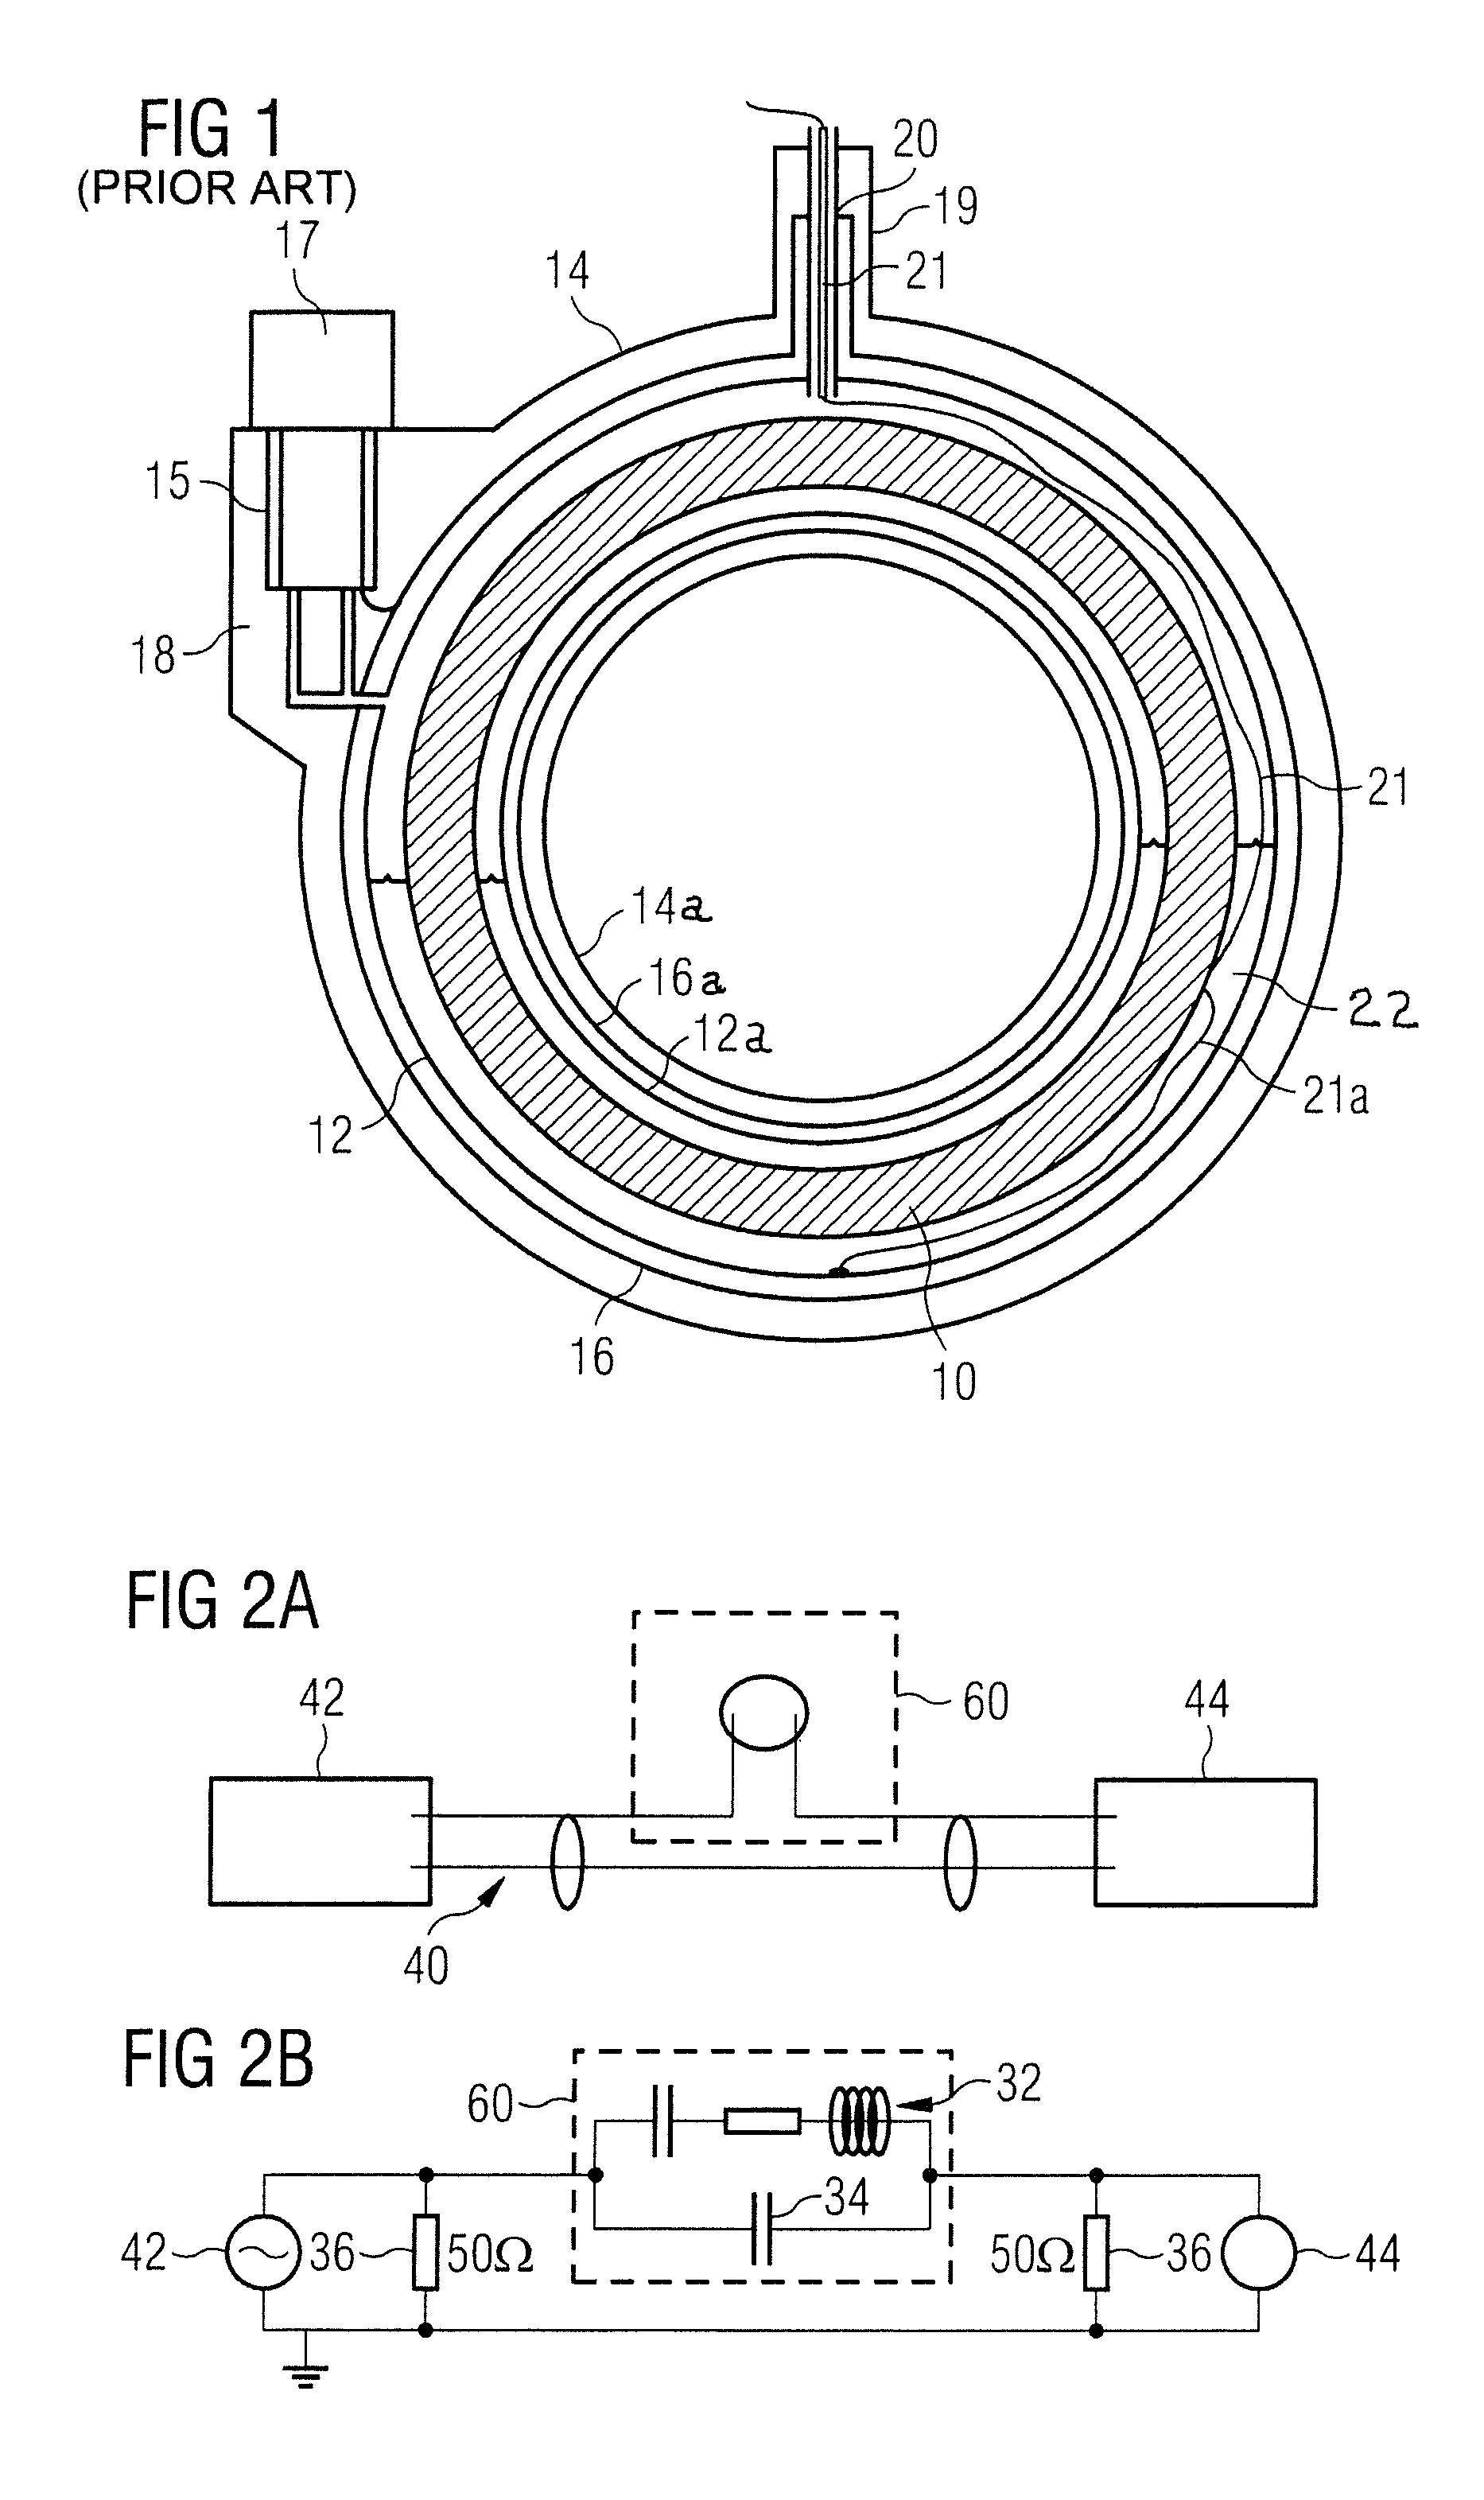 Methods and apparatus for detection of air ingress into cryogen vessels